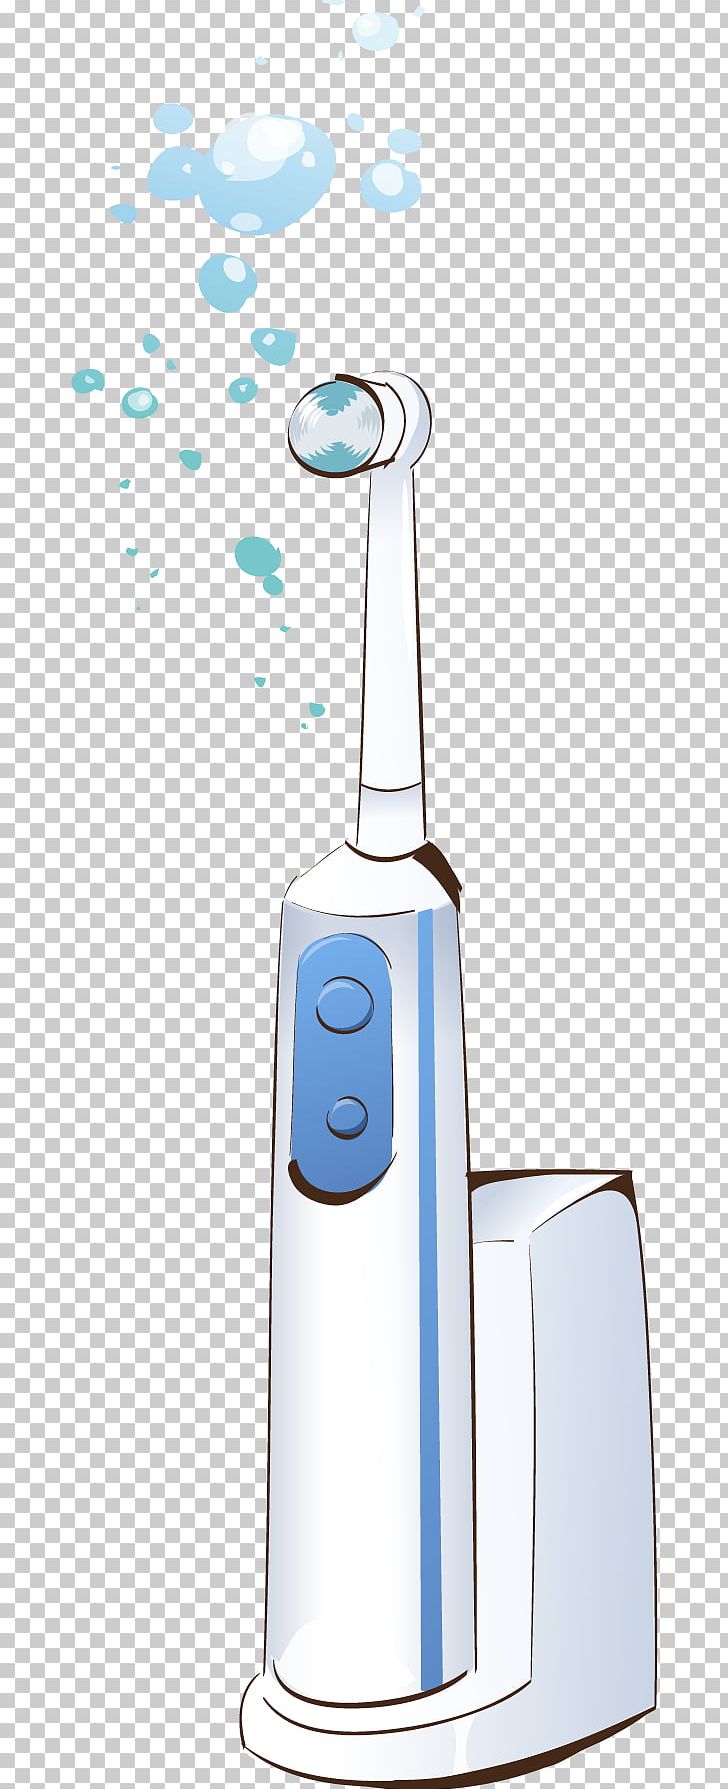 Electric Toothbrush PNG, Clipart, Brush, Child, Electric, Electrical, Electricity Free PNG Download